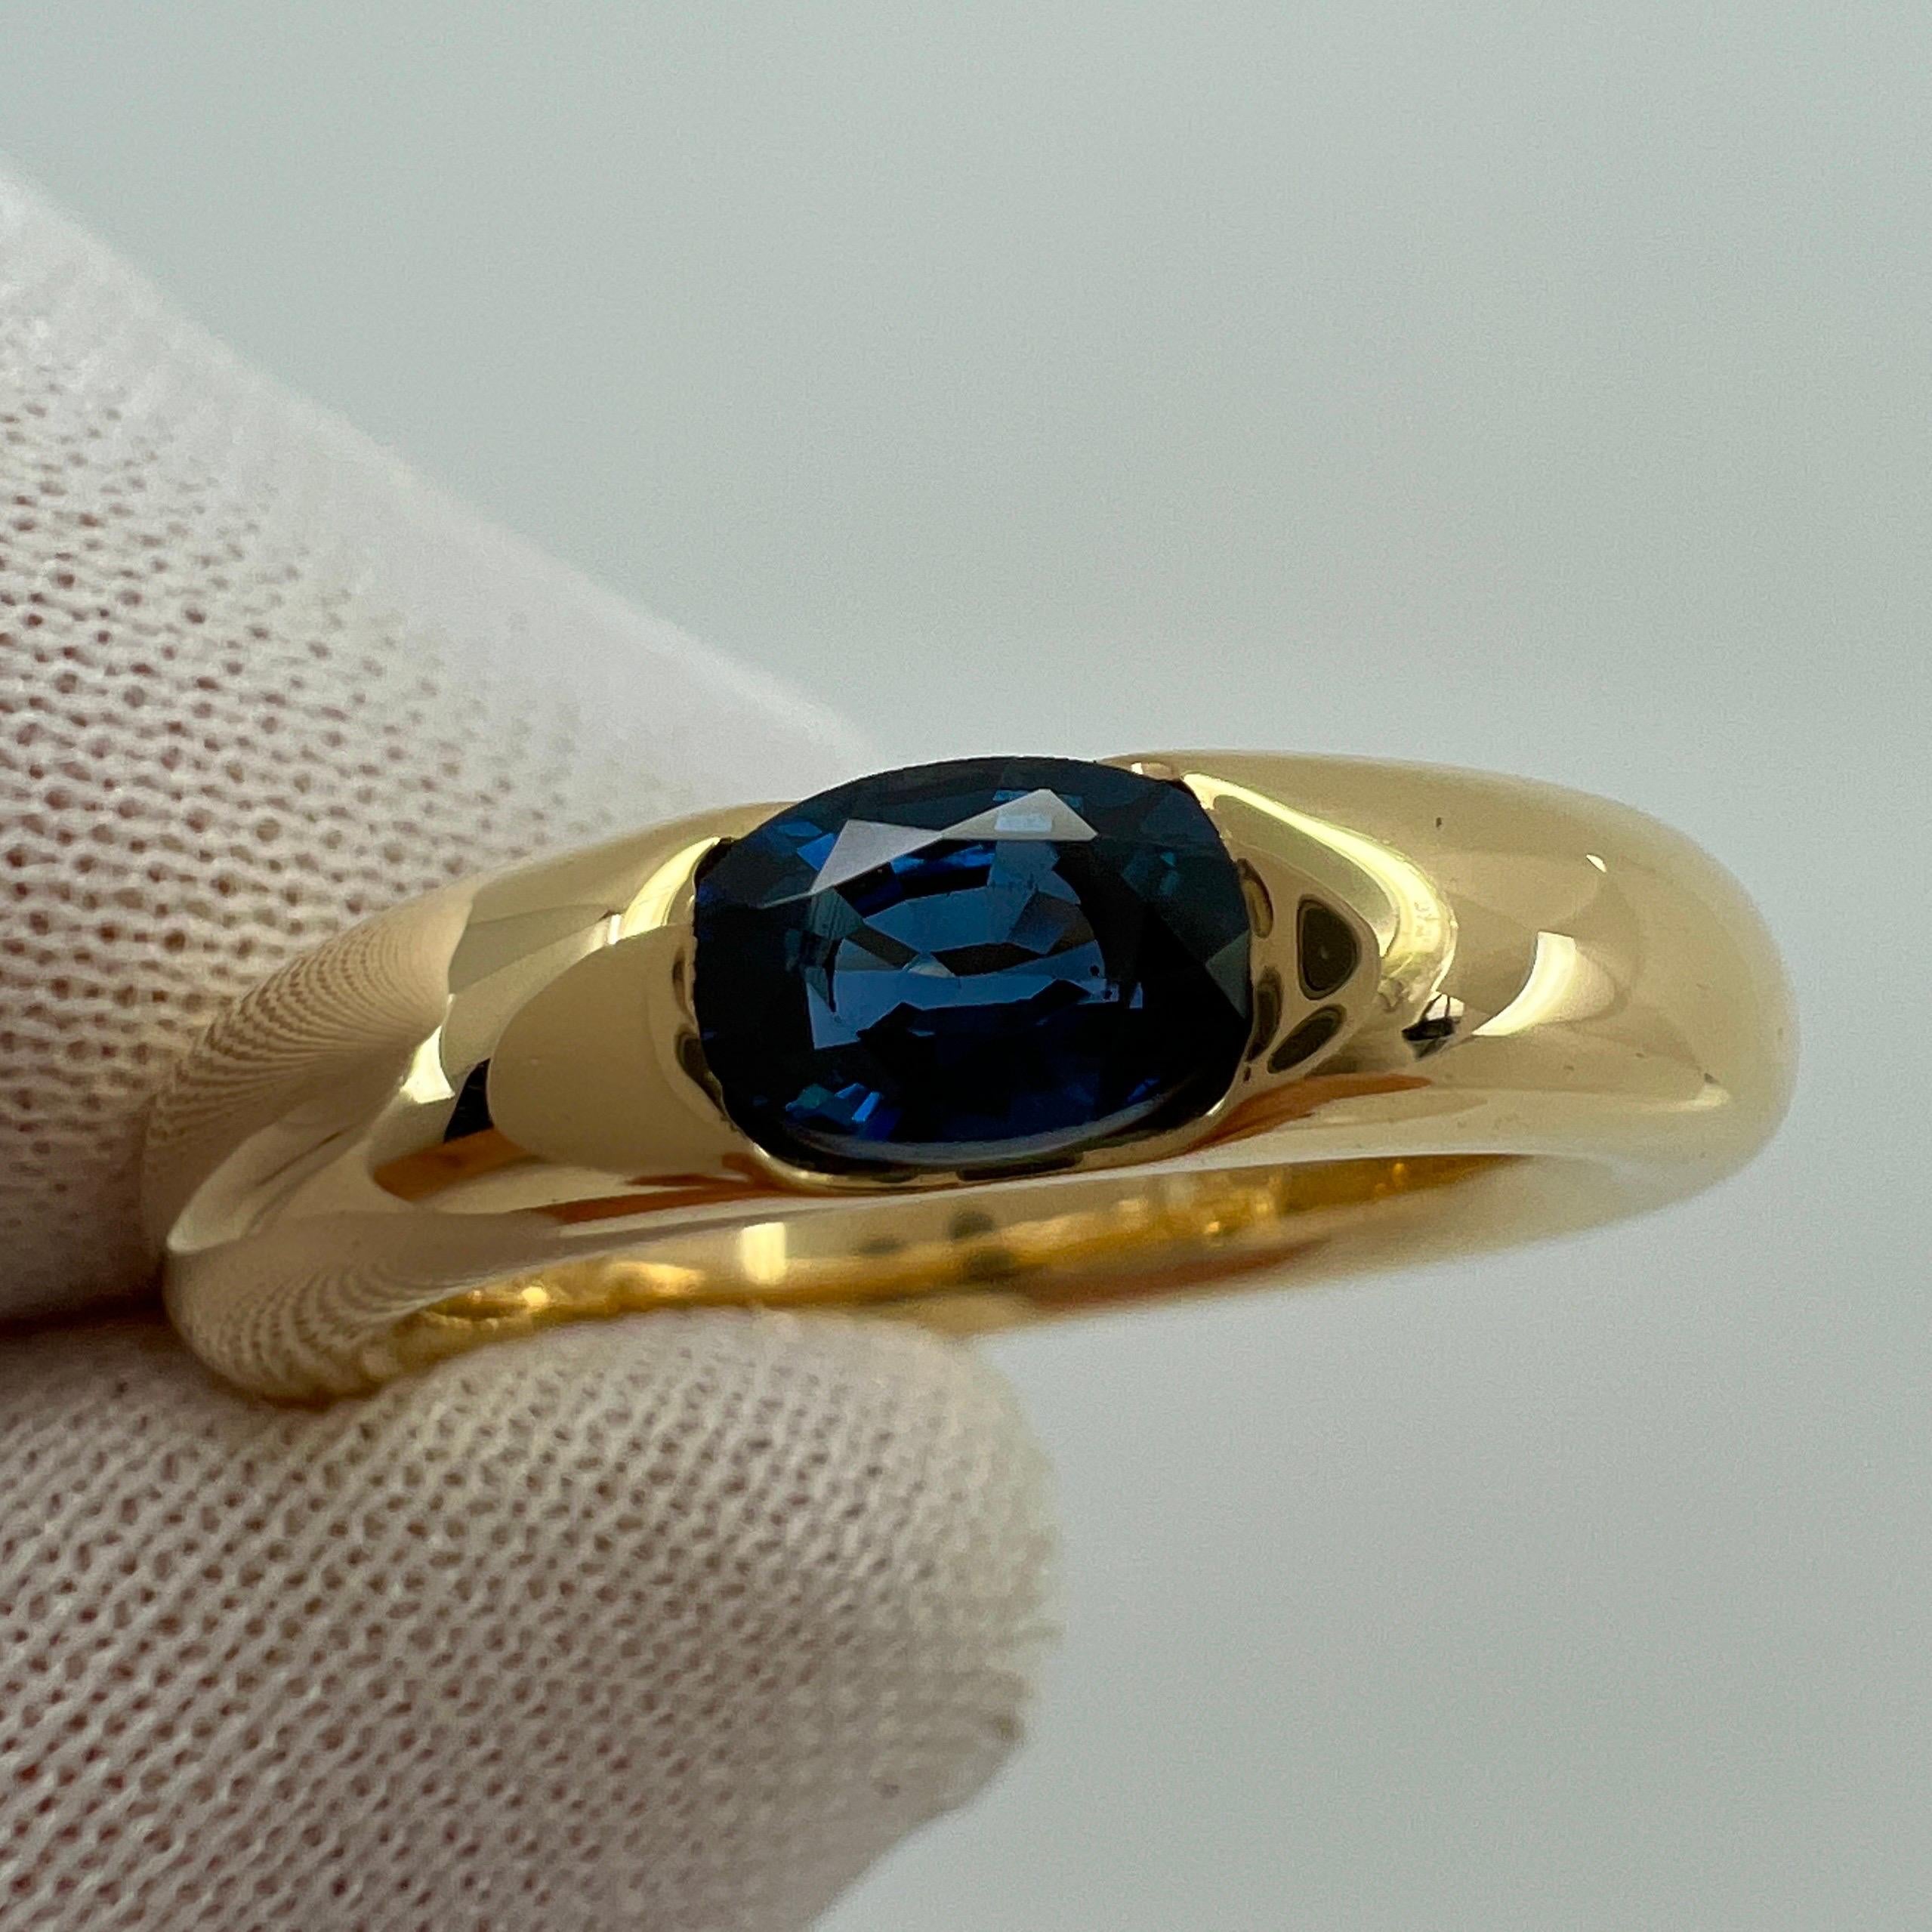 Vintage Cartier Deep Blue Sapphire Oval Ellipse 18k Yellow Gold Solitaire Ring 6